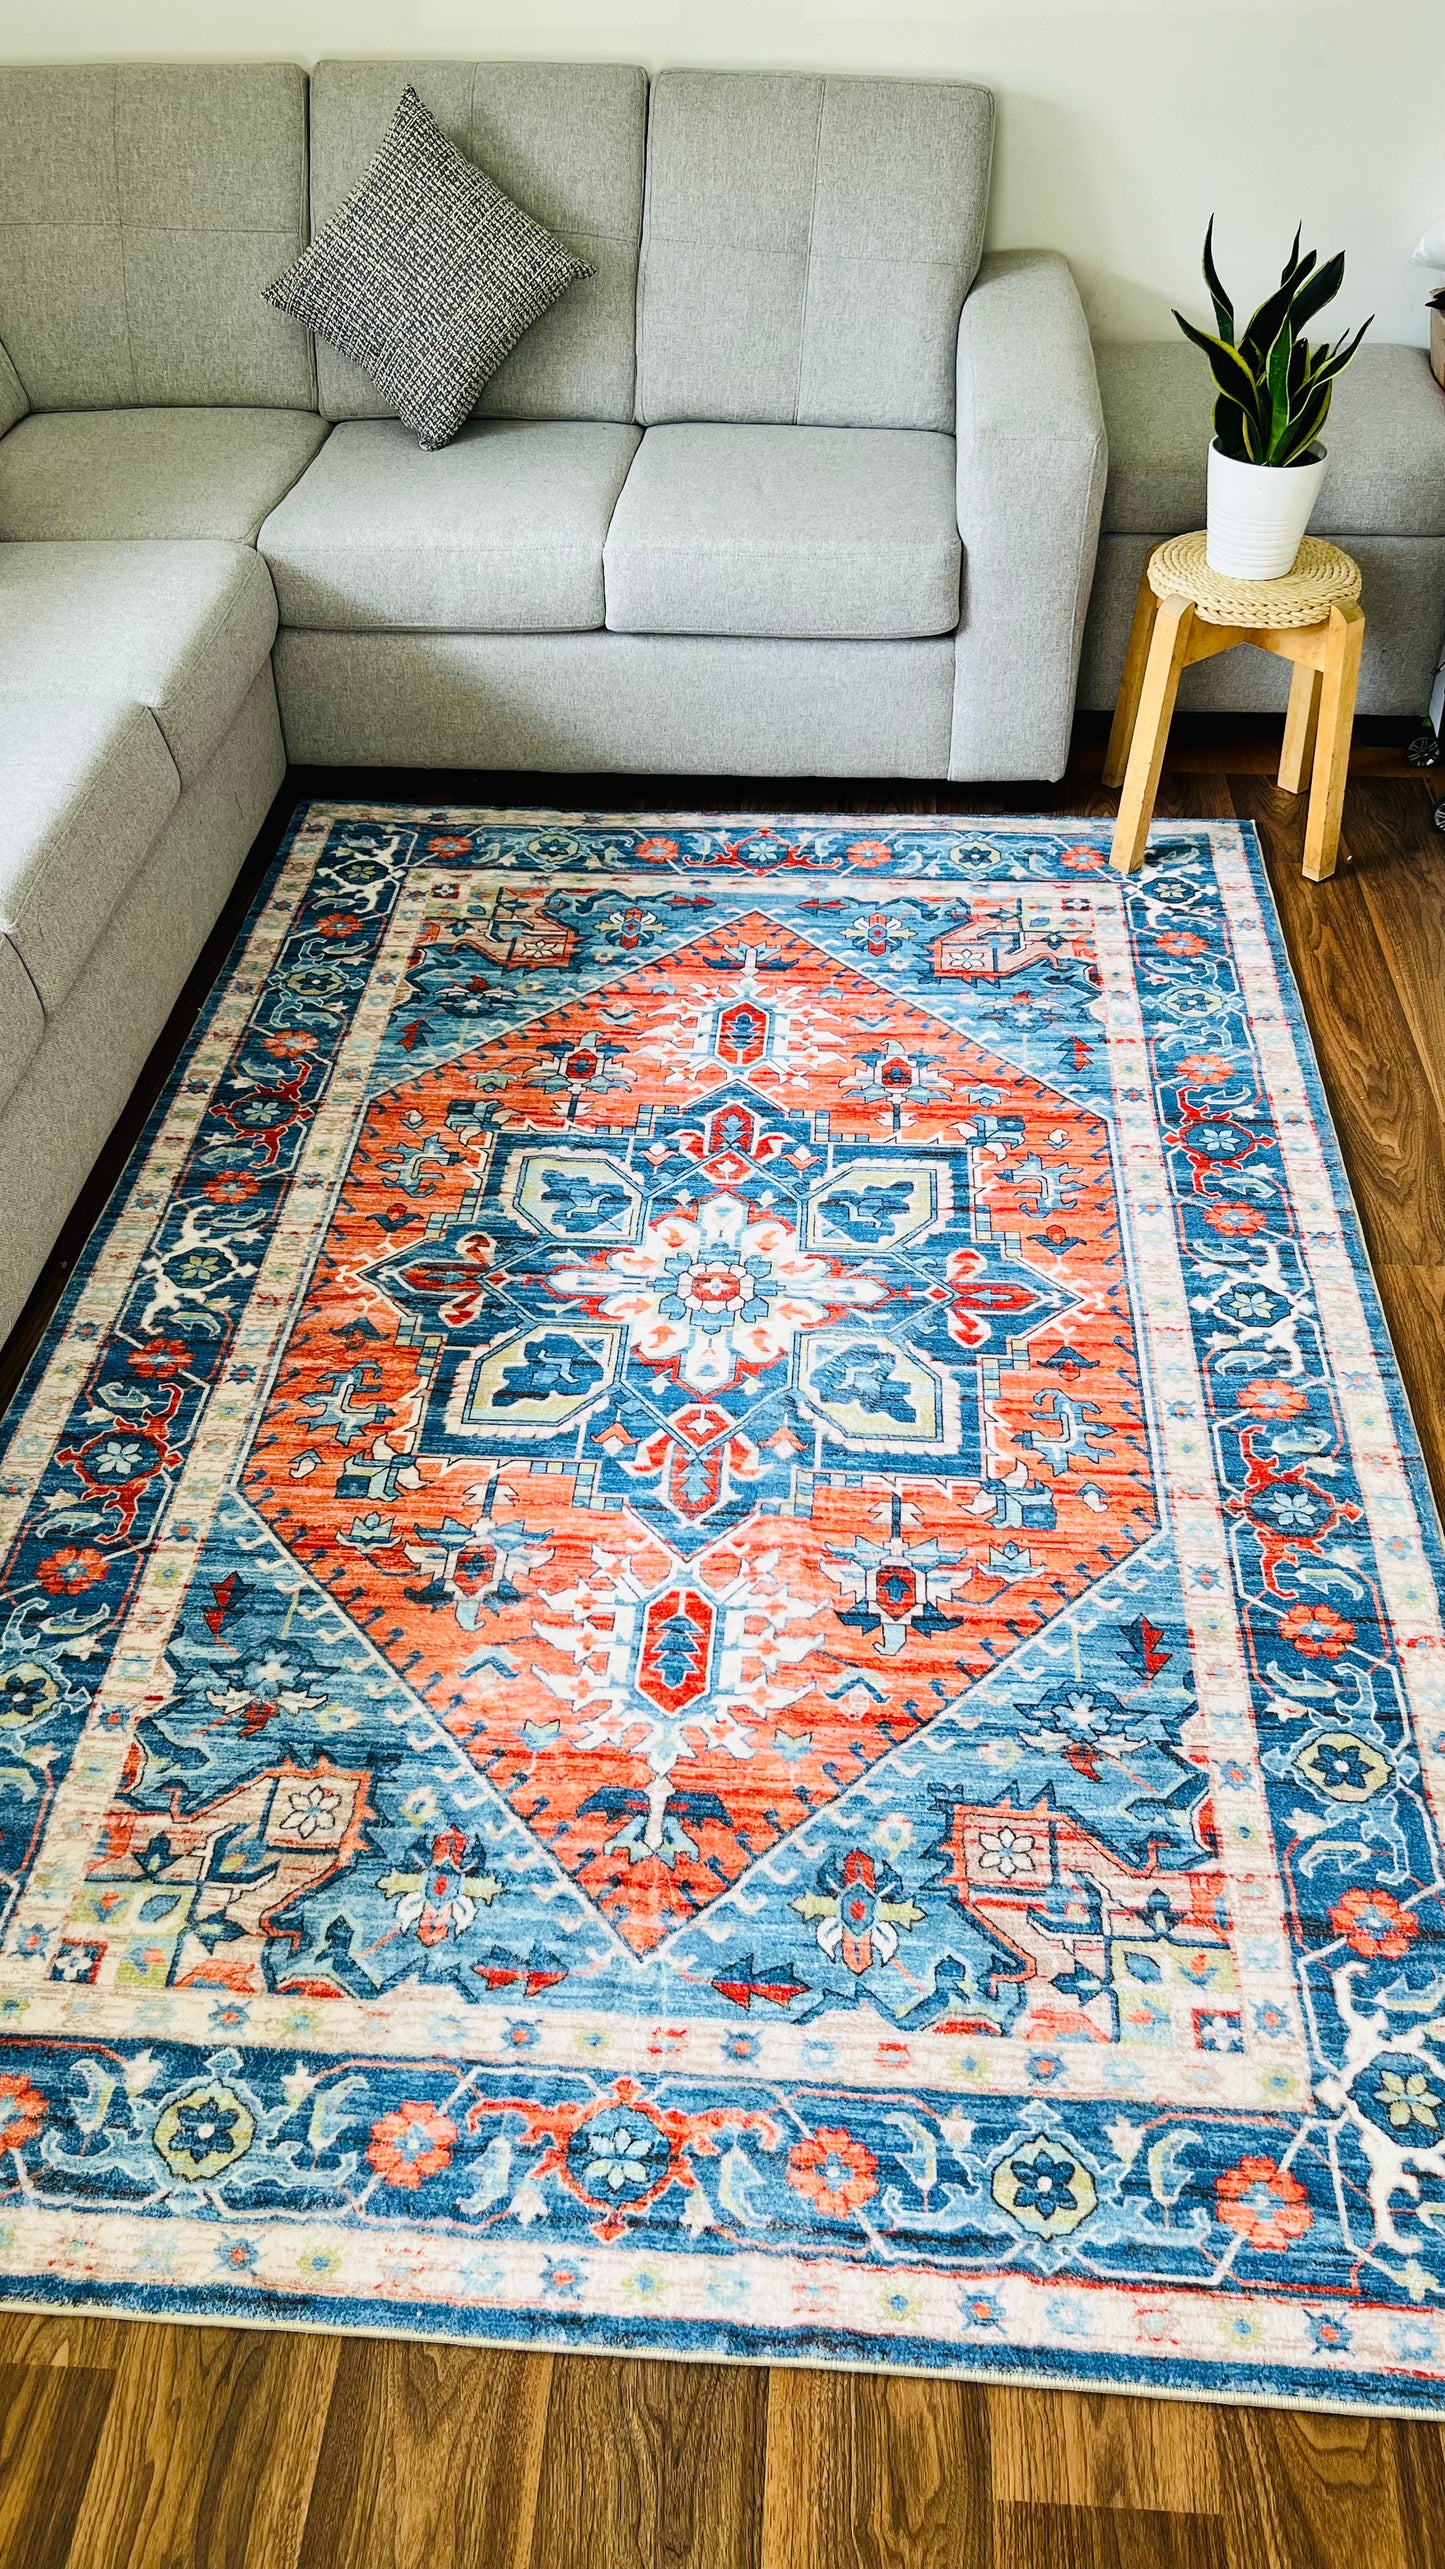 Elevate with Elegance: Persian Rugs Beyond Ordinary